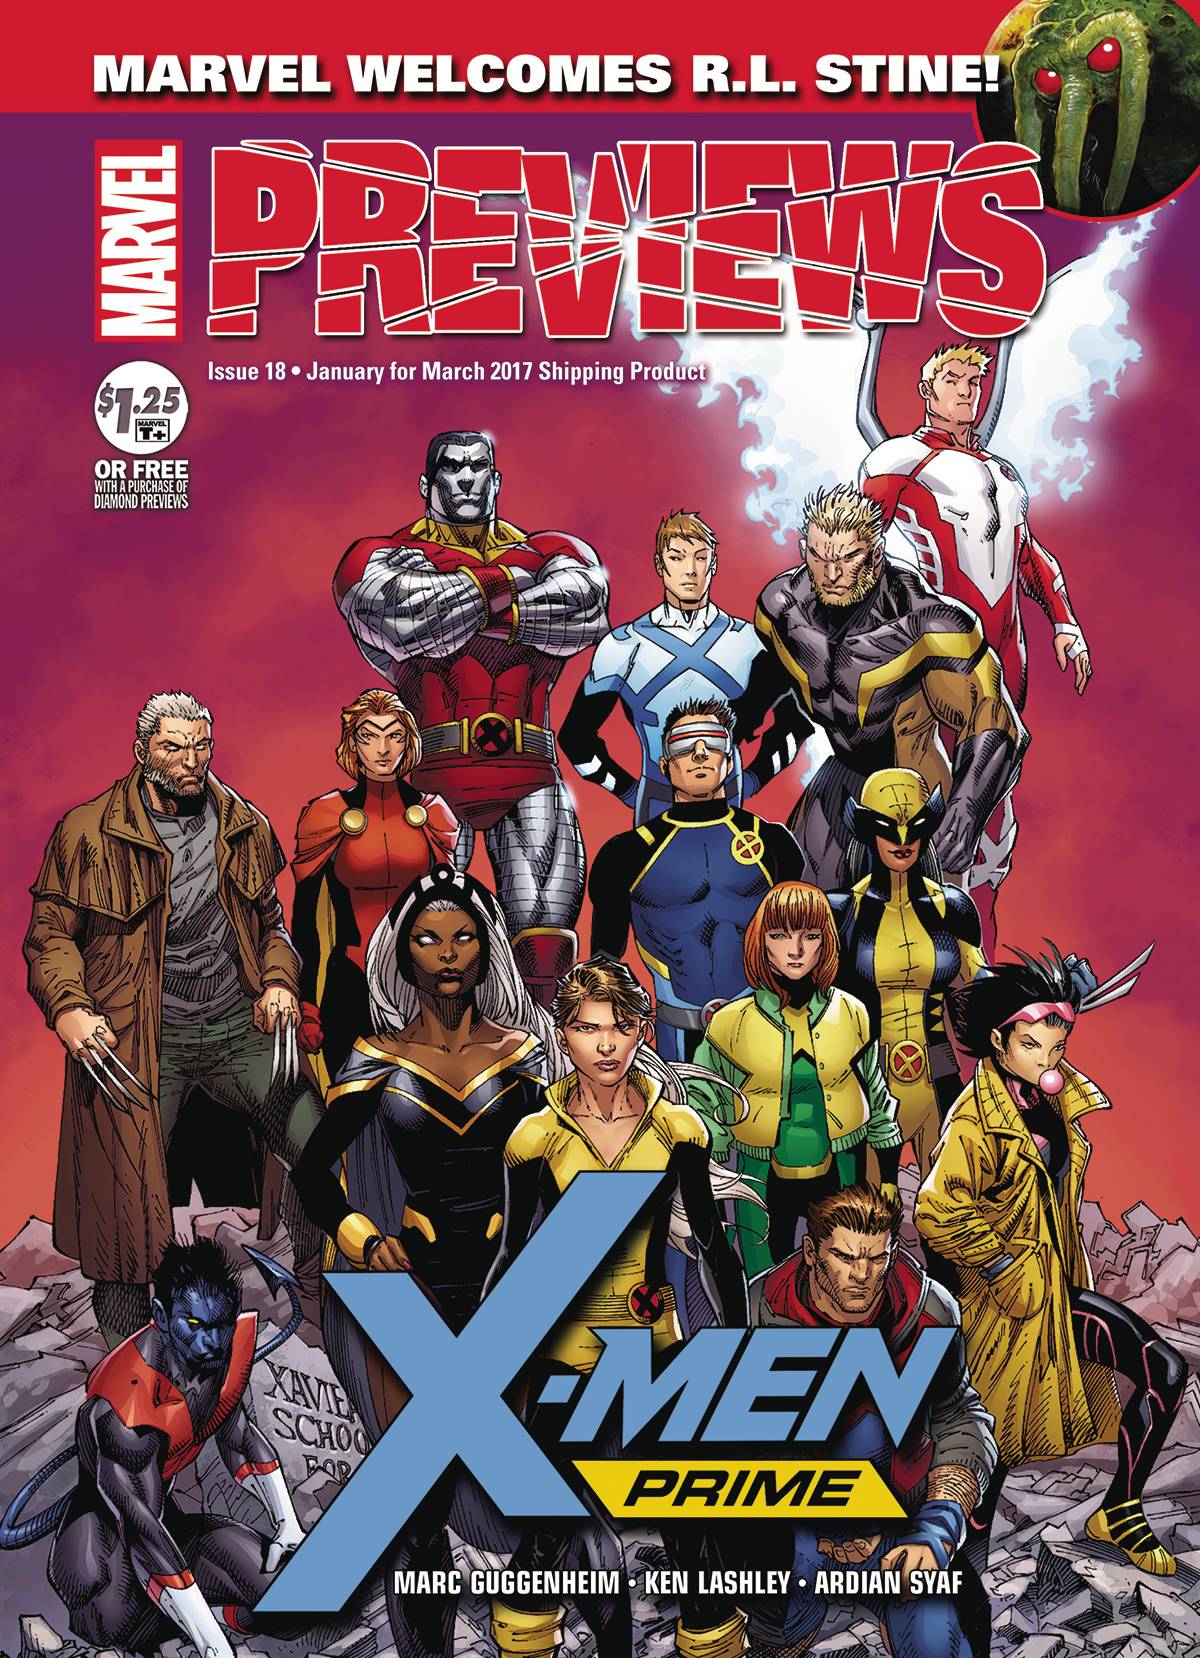 Marvel Previews #20 March 2017 Extras #164